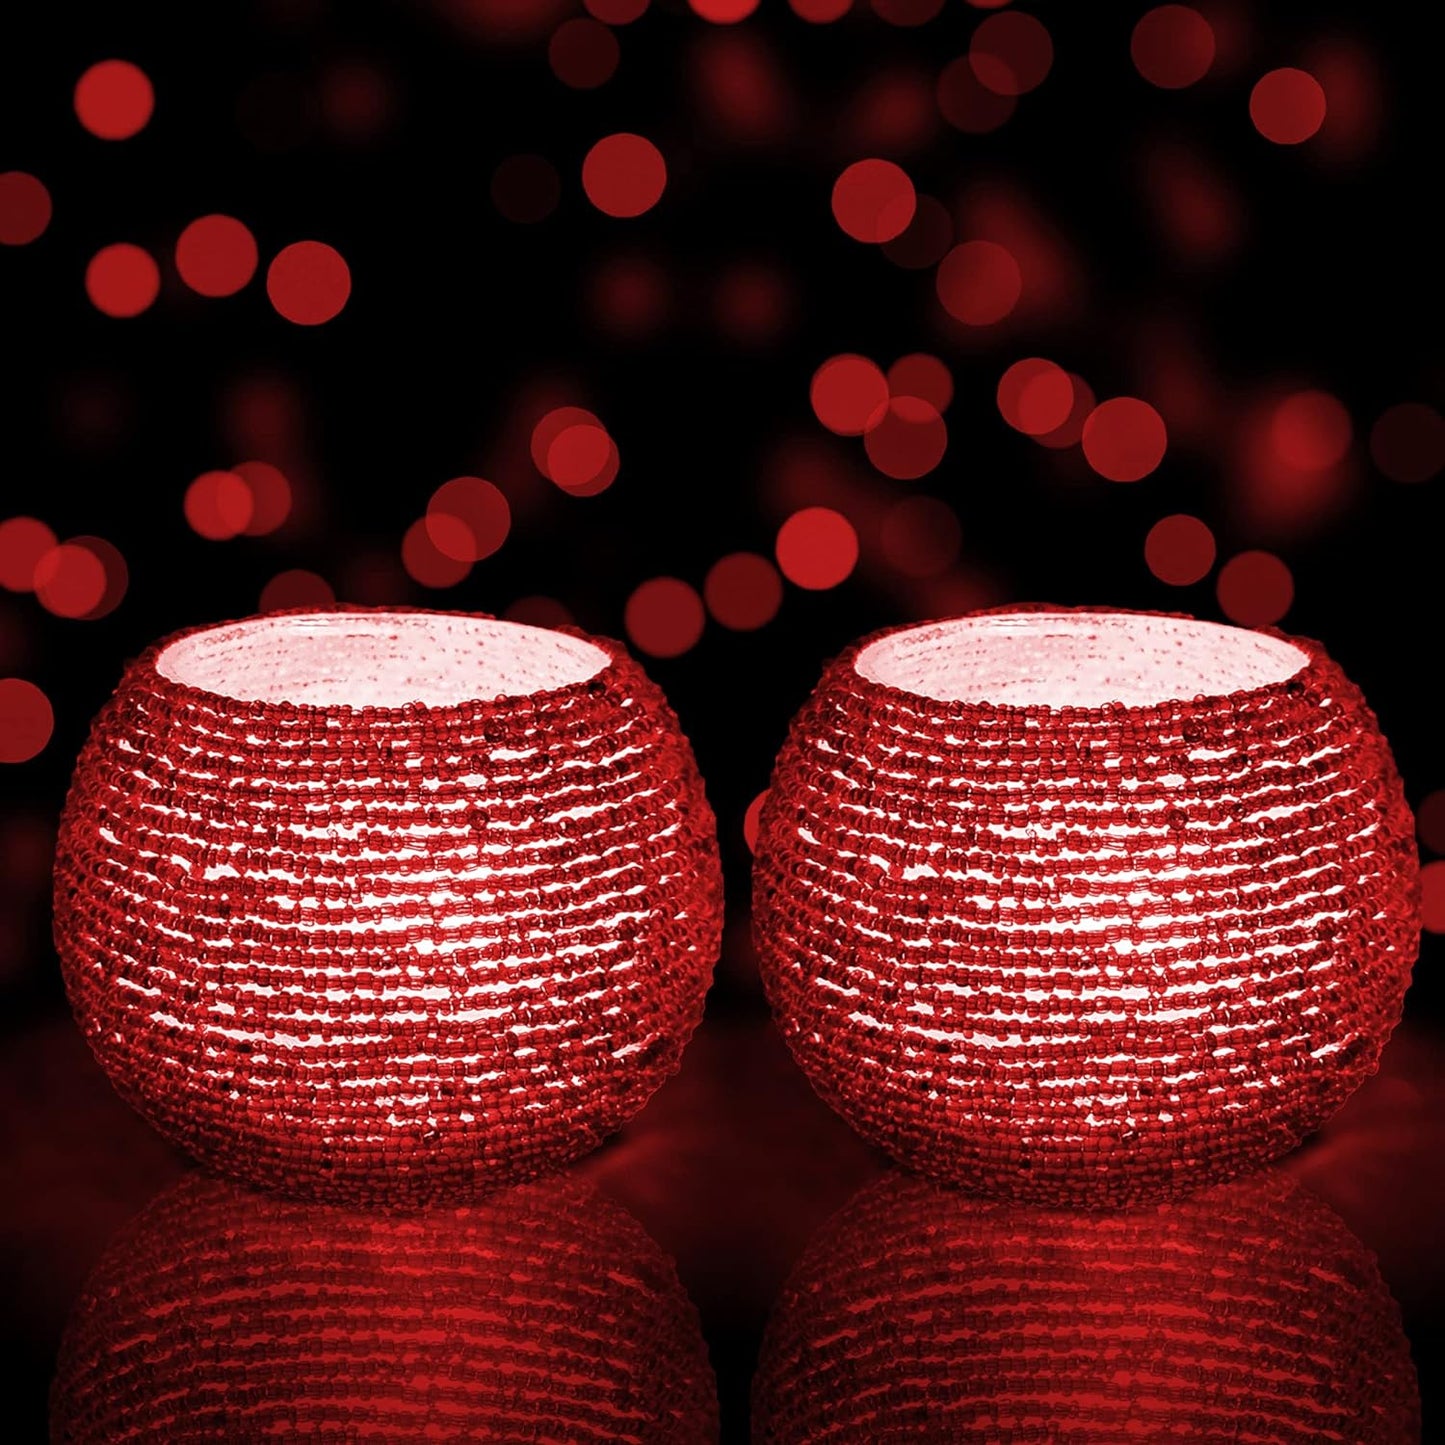 Two red candles glowing on black background.